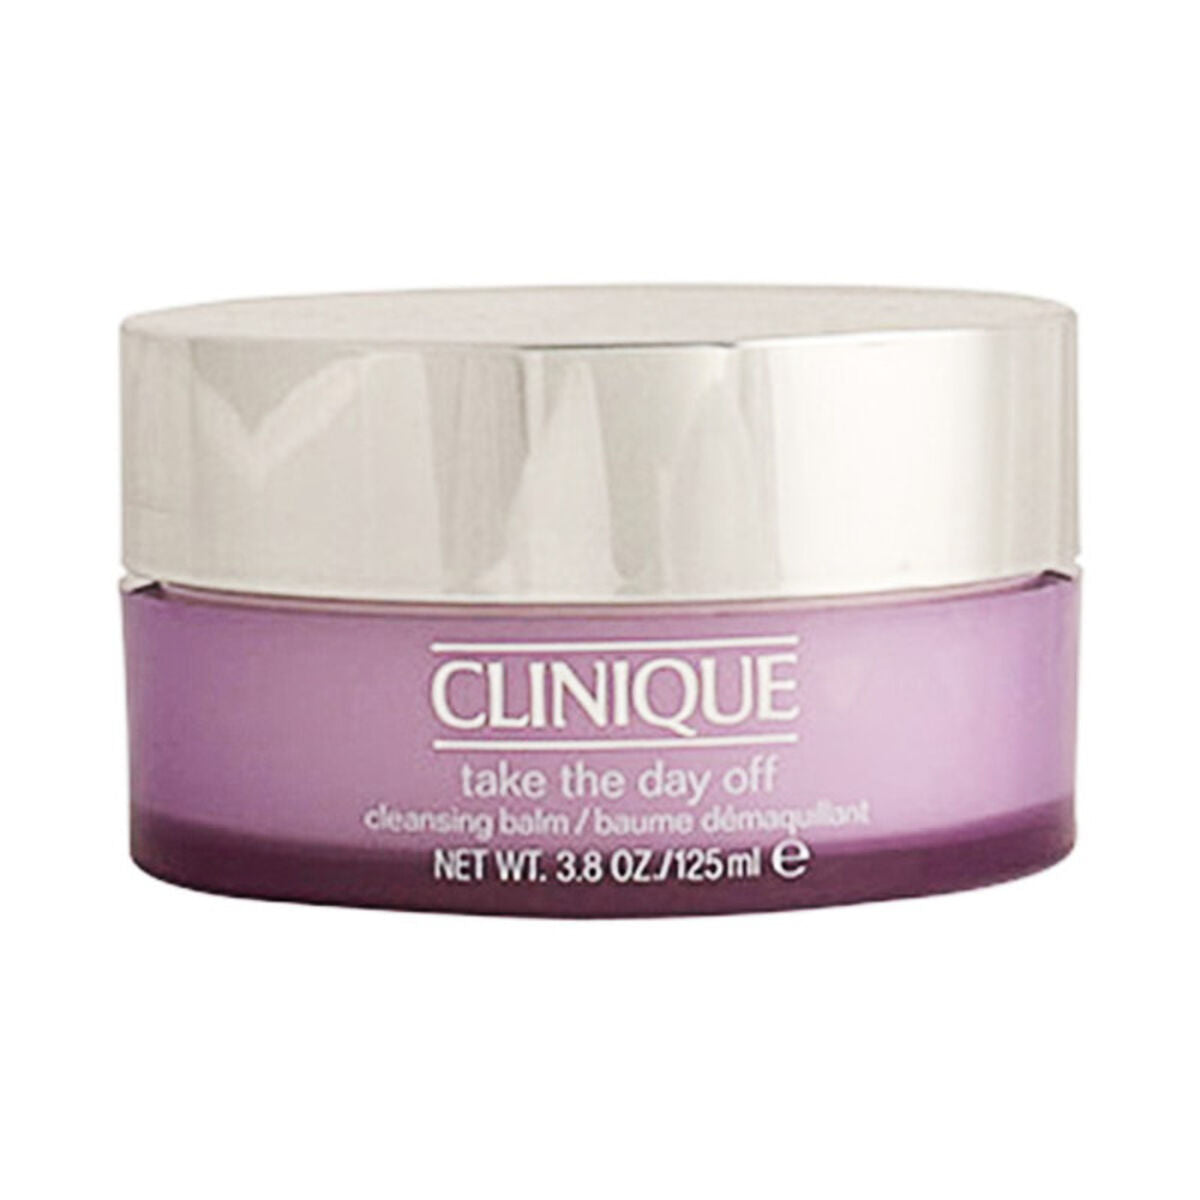 Facial Make Up Remover Take The Day Off Clinique-0